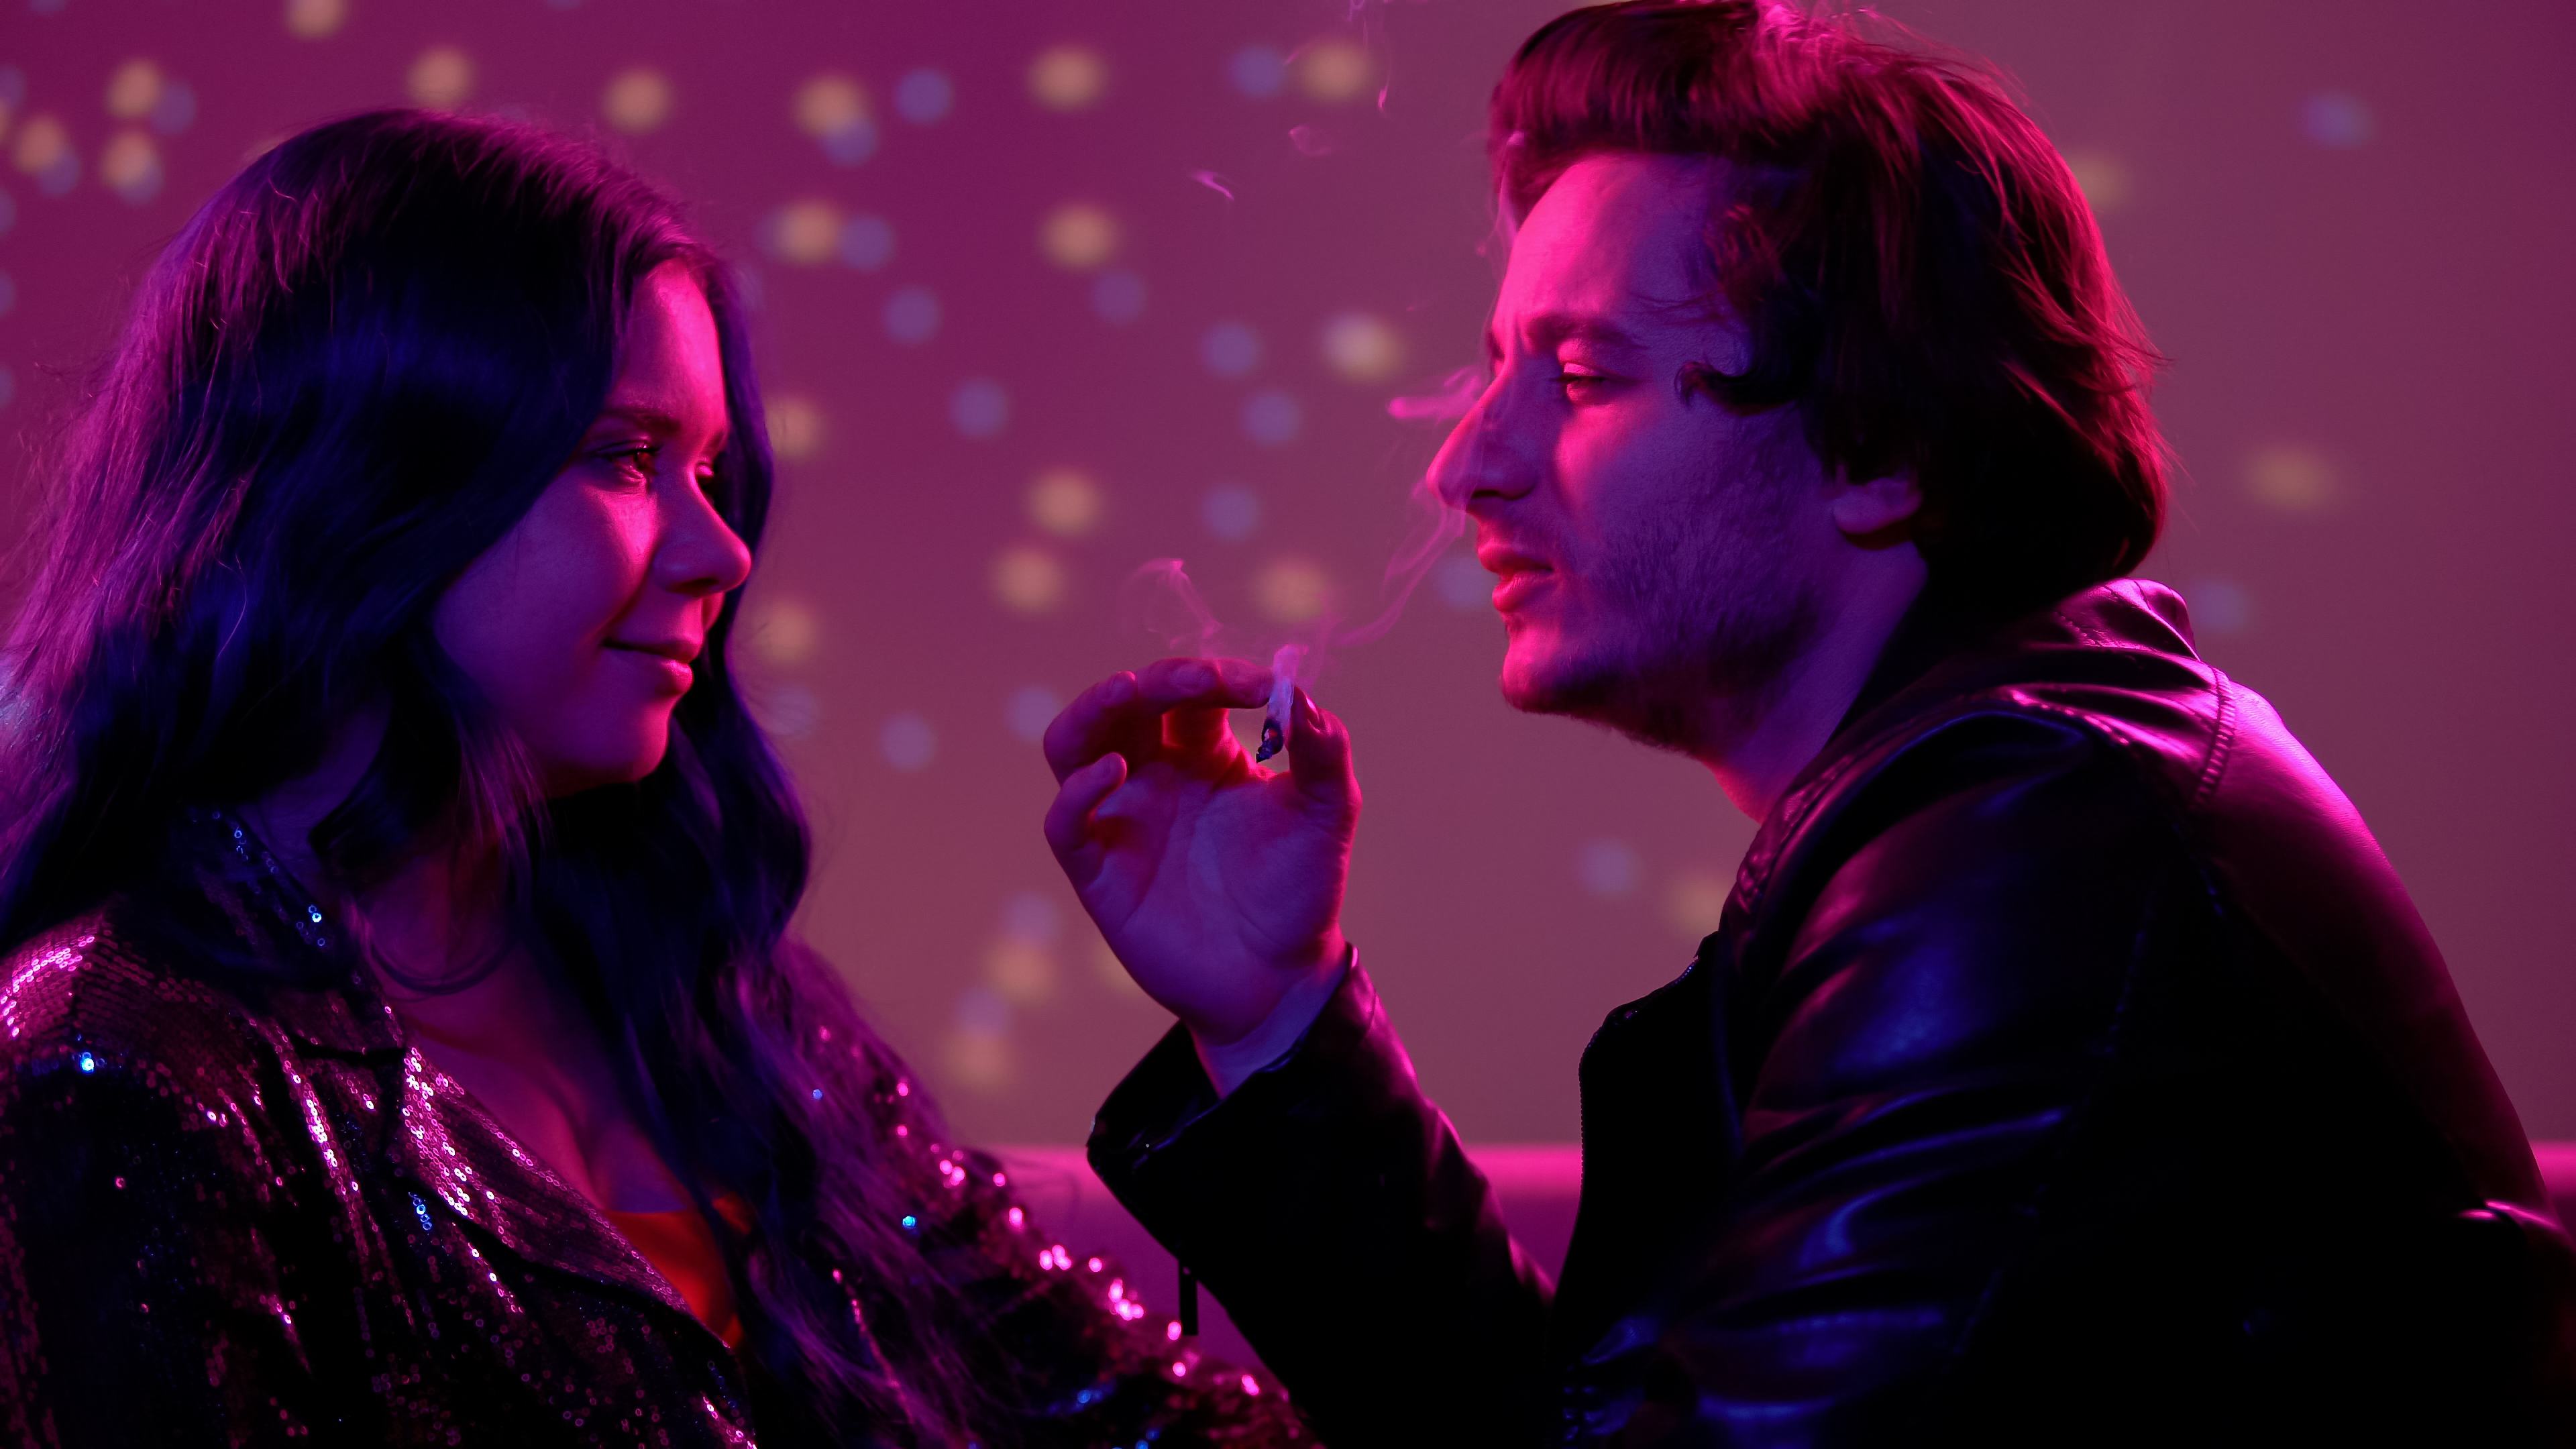 A couple face each other while at a club with the man holding a joint in his hand. The background is dark purple.